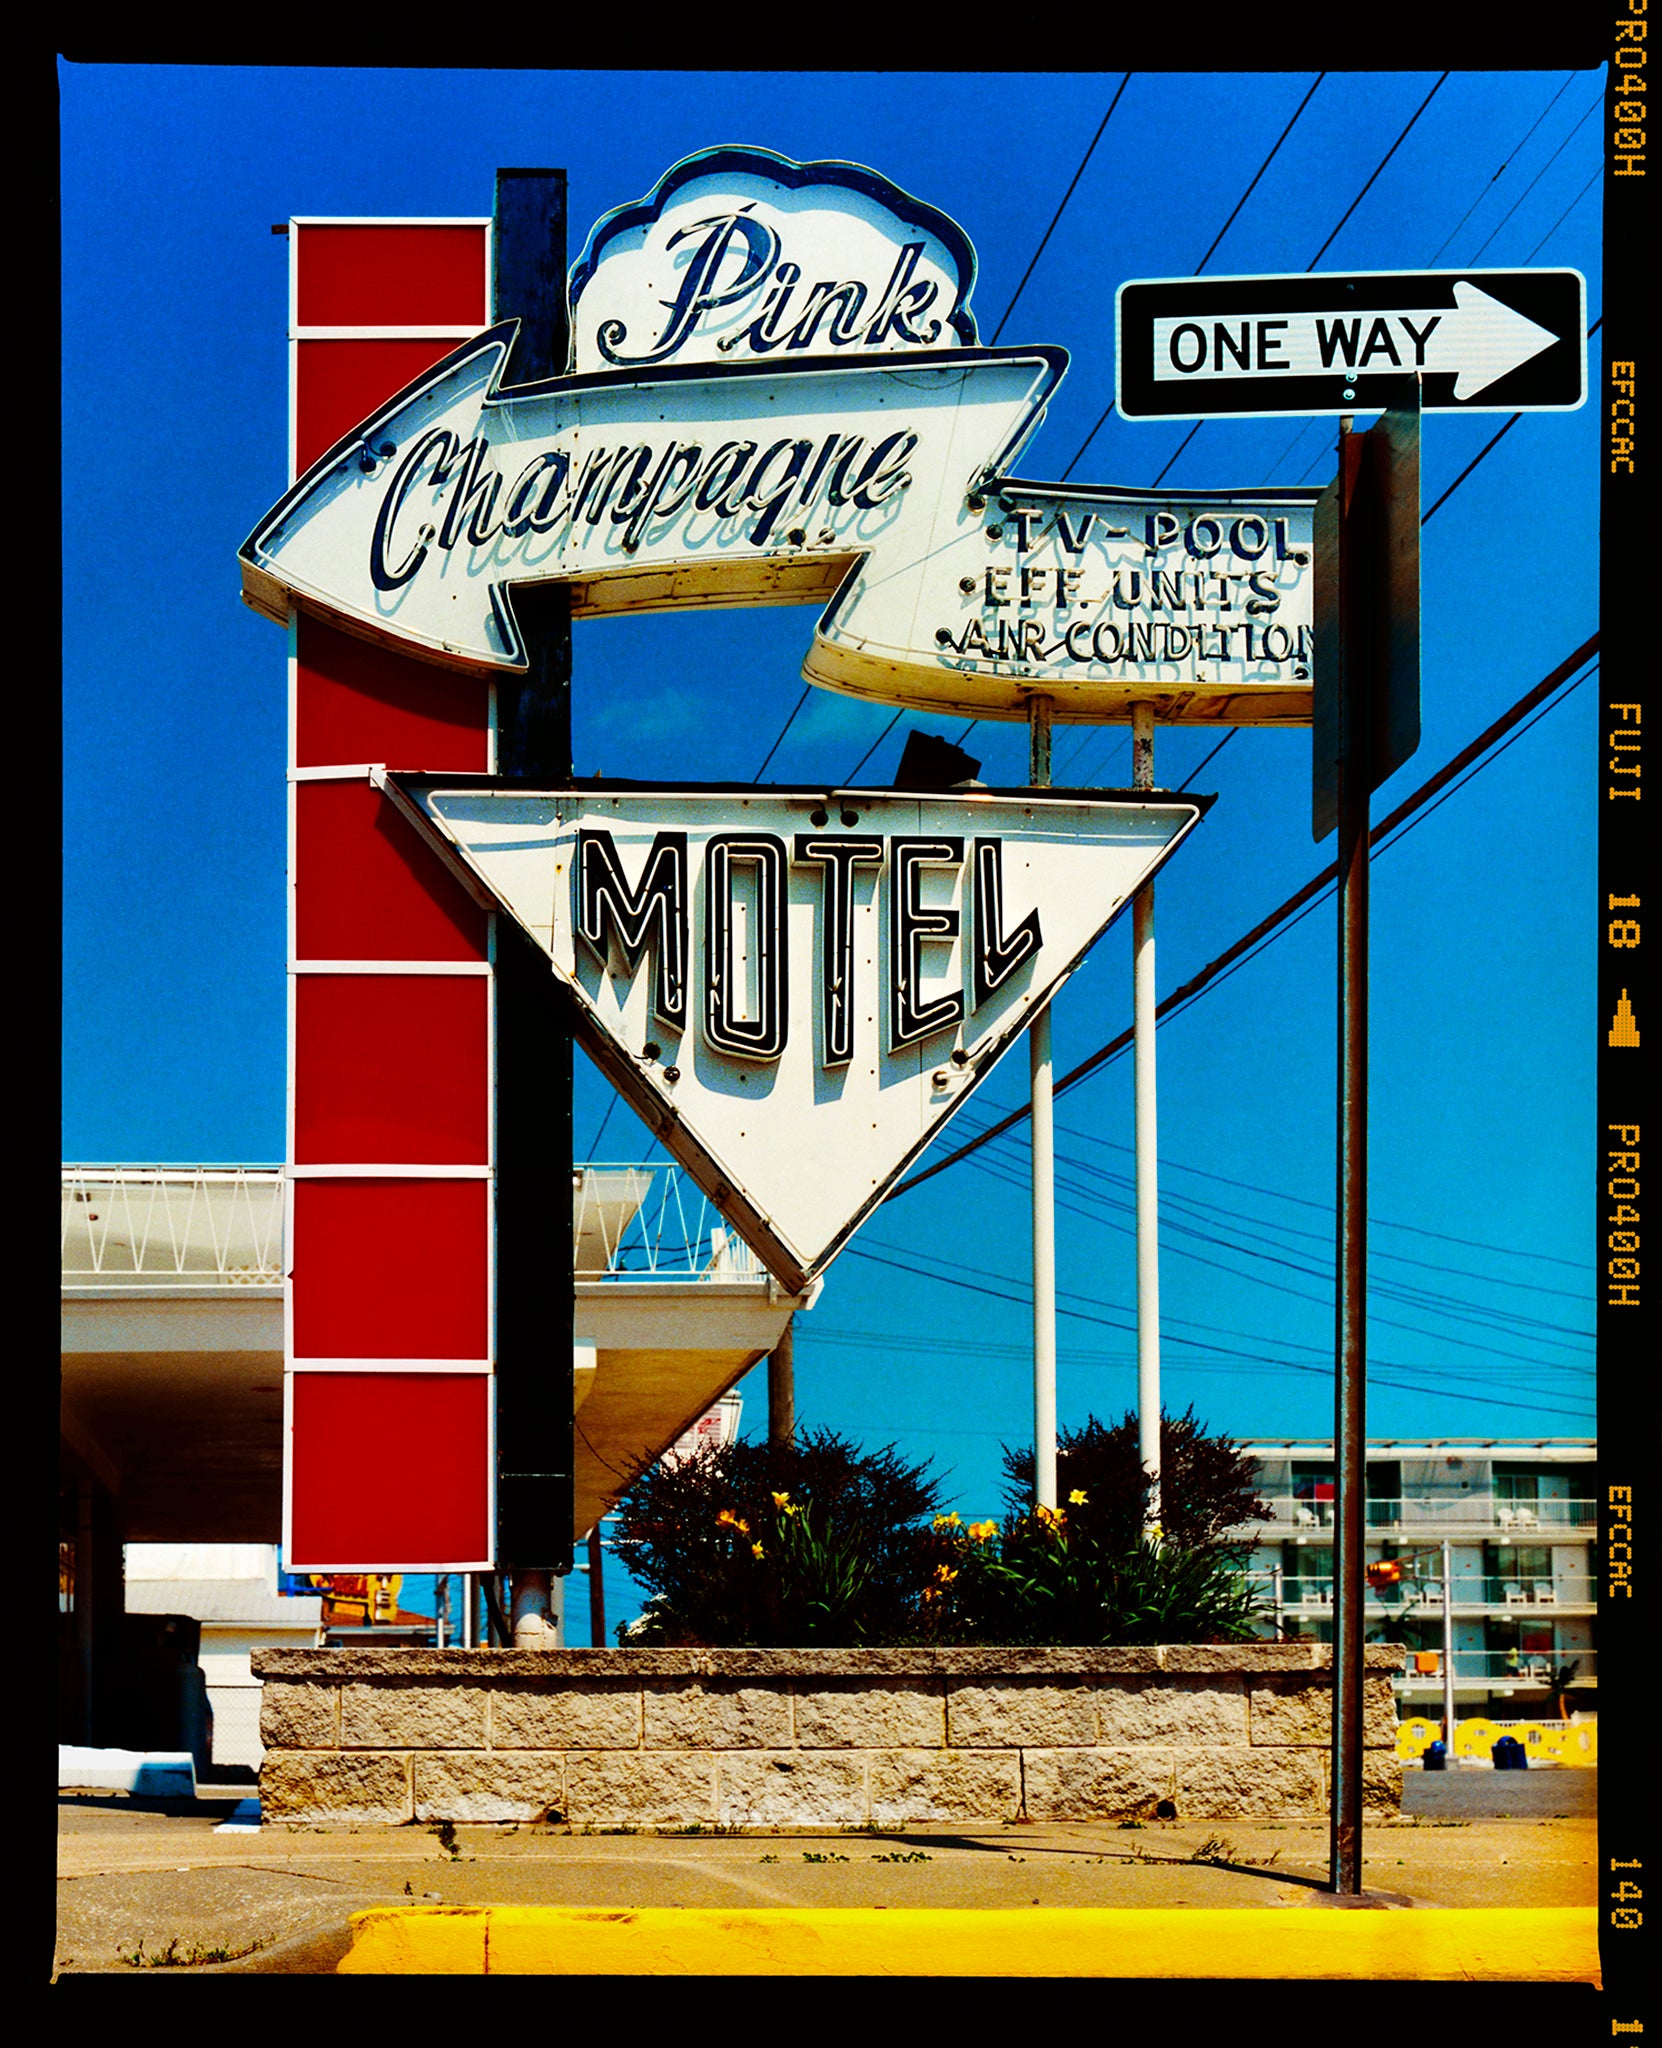 Photograph by Richard Heeps. A group of signs on an American Road sitting outside a motel mounted on a post with a vertical line of red squares.  The top of  the sign shows an arrow pointing to the left to Pink Champagne, there is an arrow pointing down with MOTEL written in it. In front of this motel sign is a one way sign pointing to the right. 